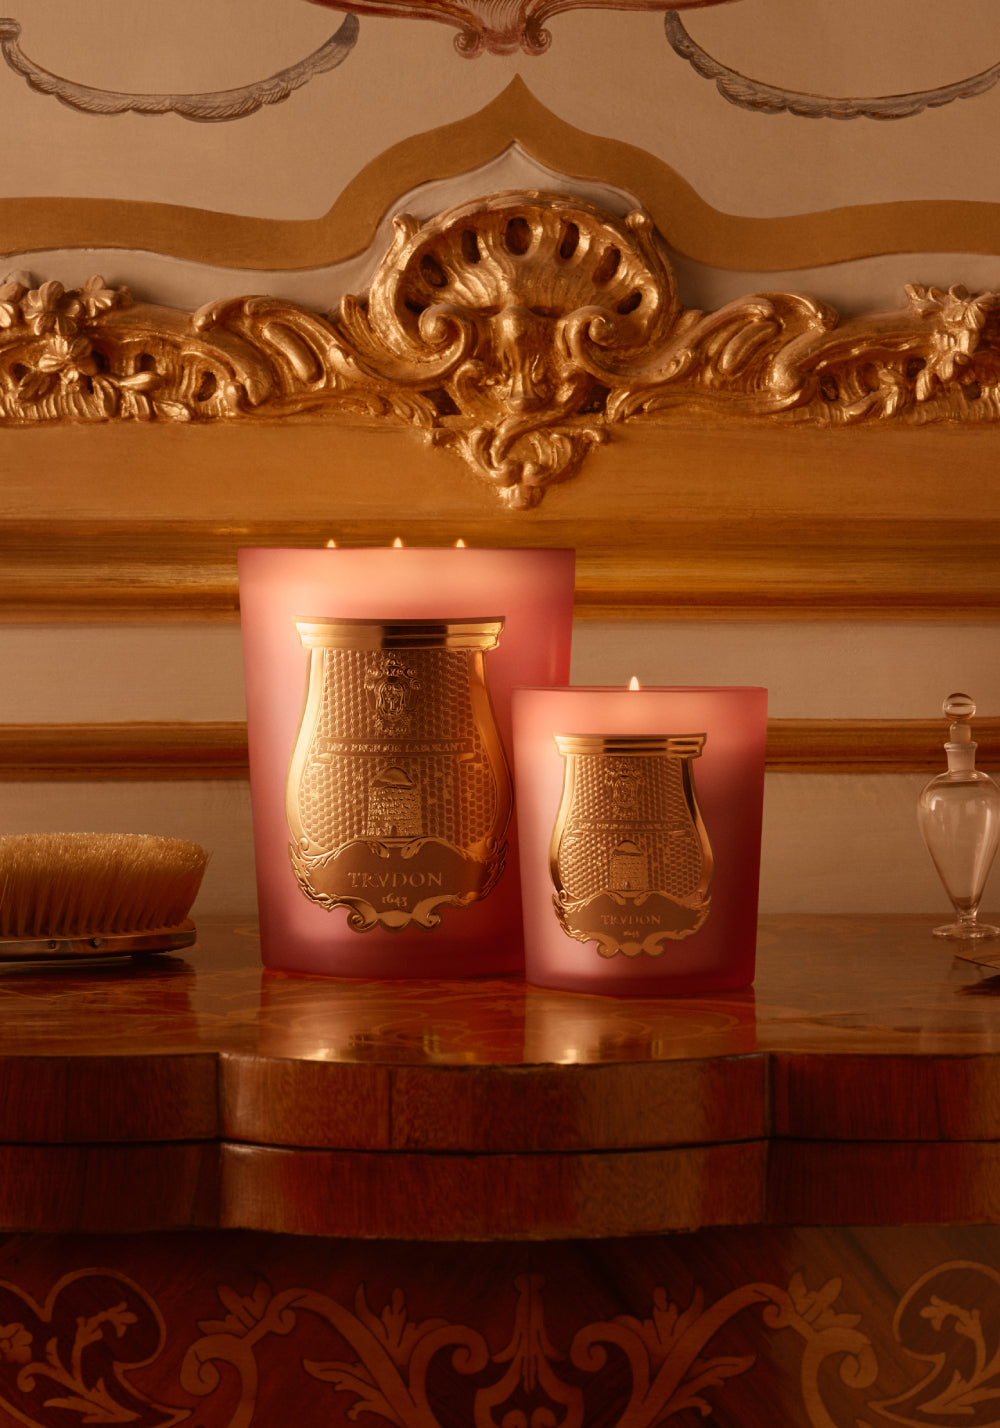 CIRE TRUDON CANDLE 270g  TUILERIES